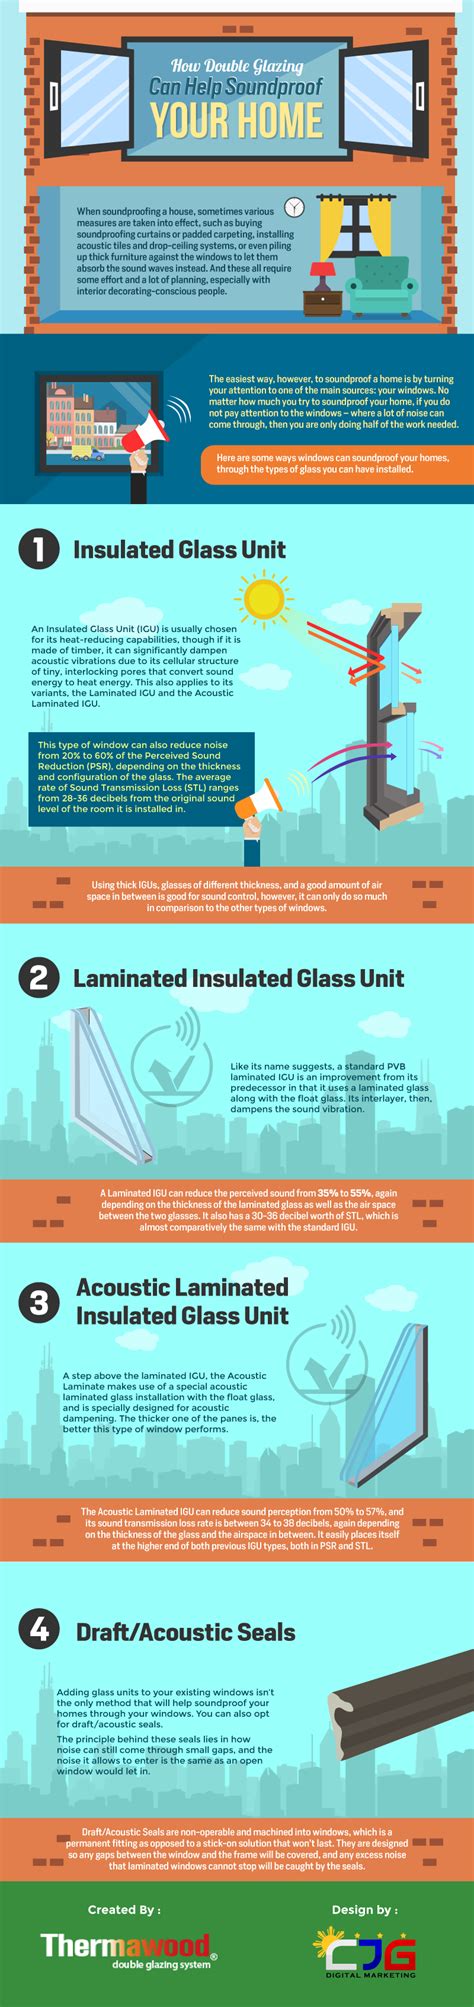 How Double Glazing Can Help Soundproof Your Home (Infographic) - Thermawood